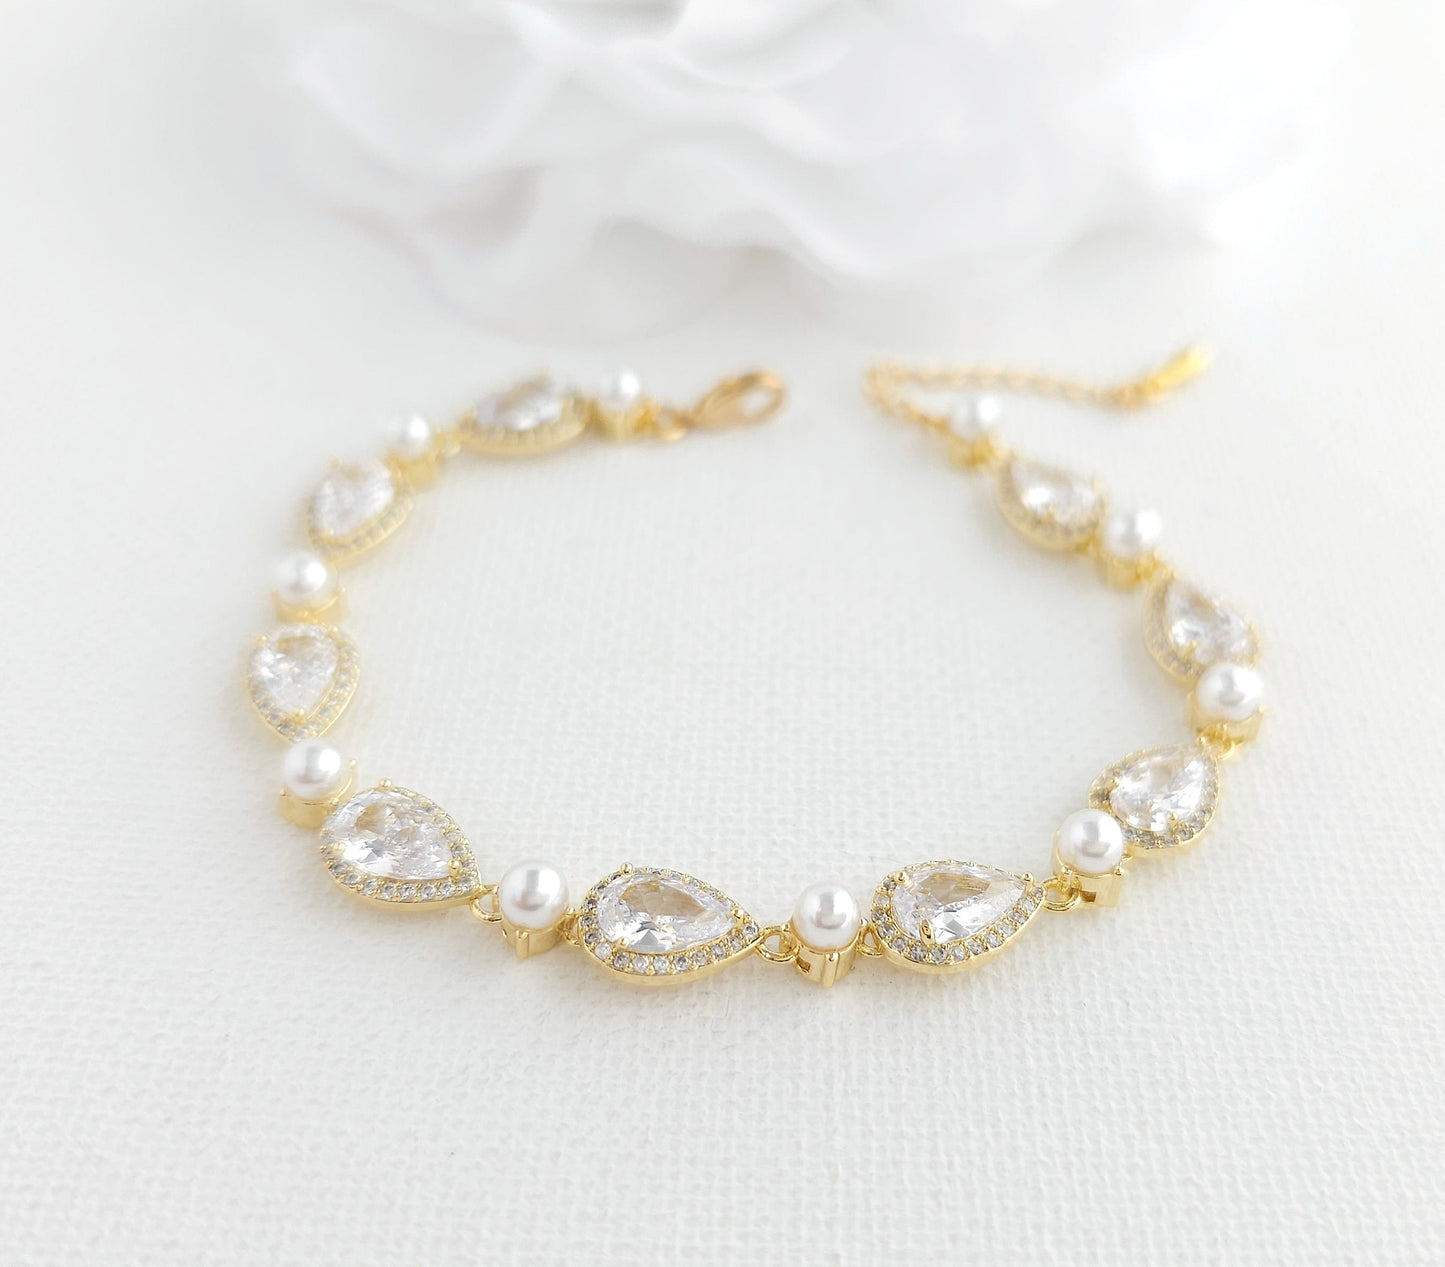 Silver Bracelet with Pearls-Emma